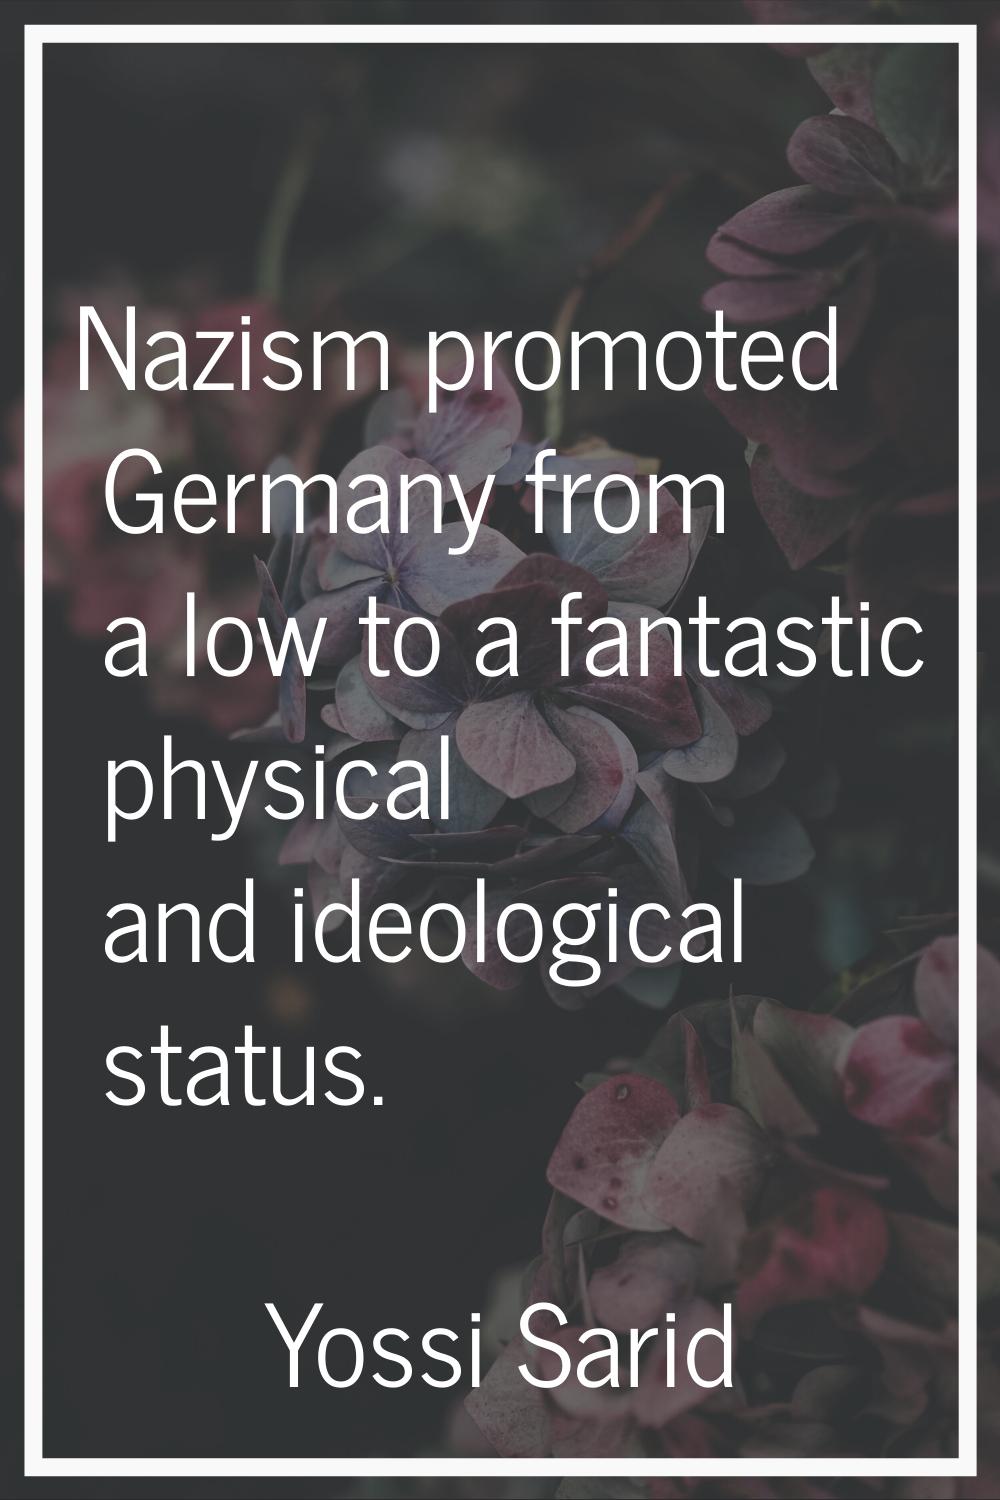 Nazism promoted Germany from a low to a fantastic physical and ideological status.